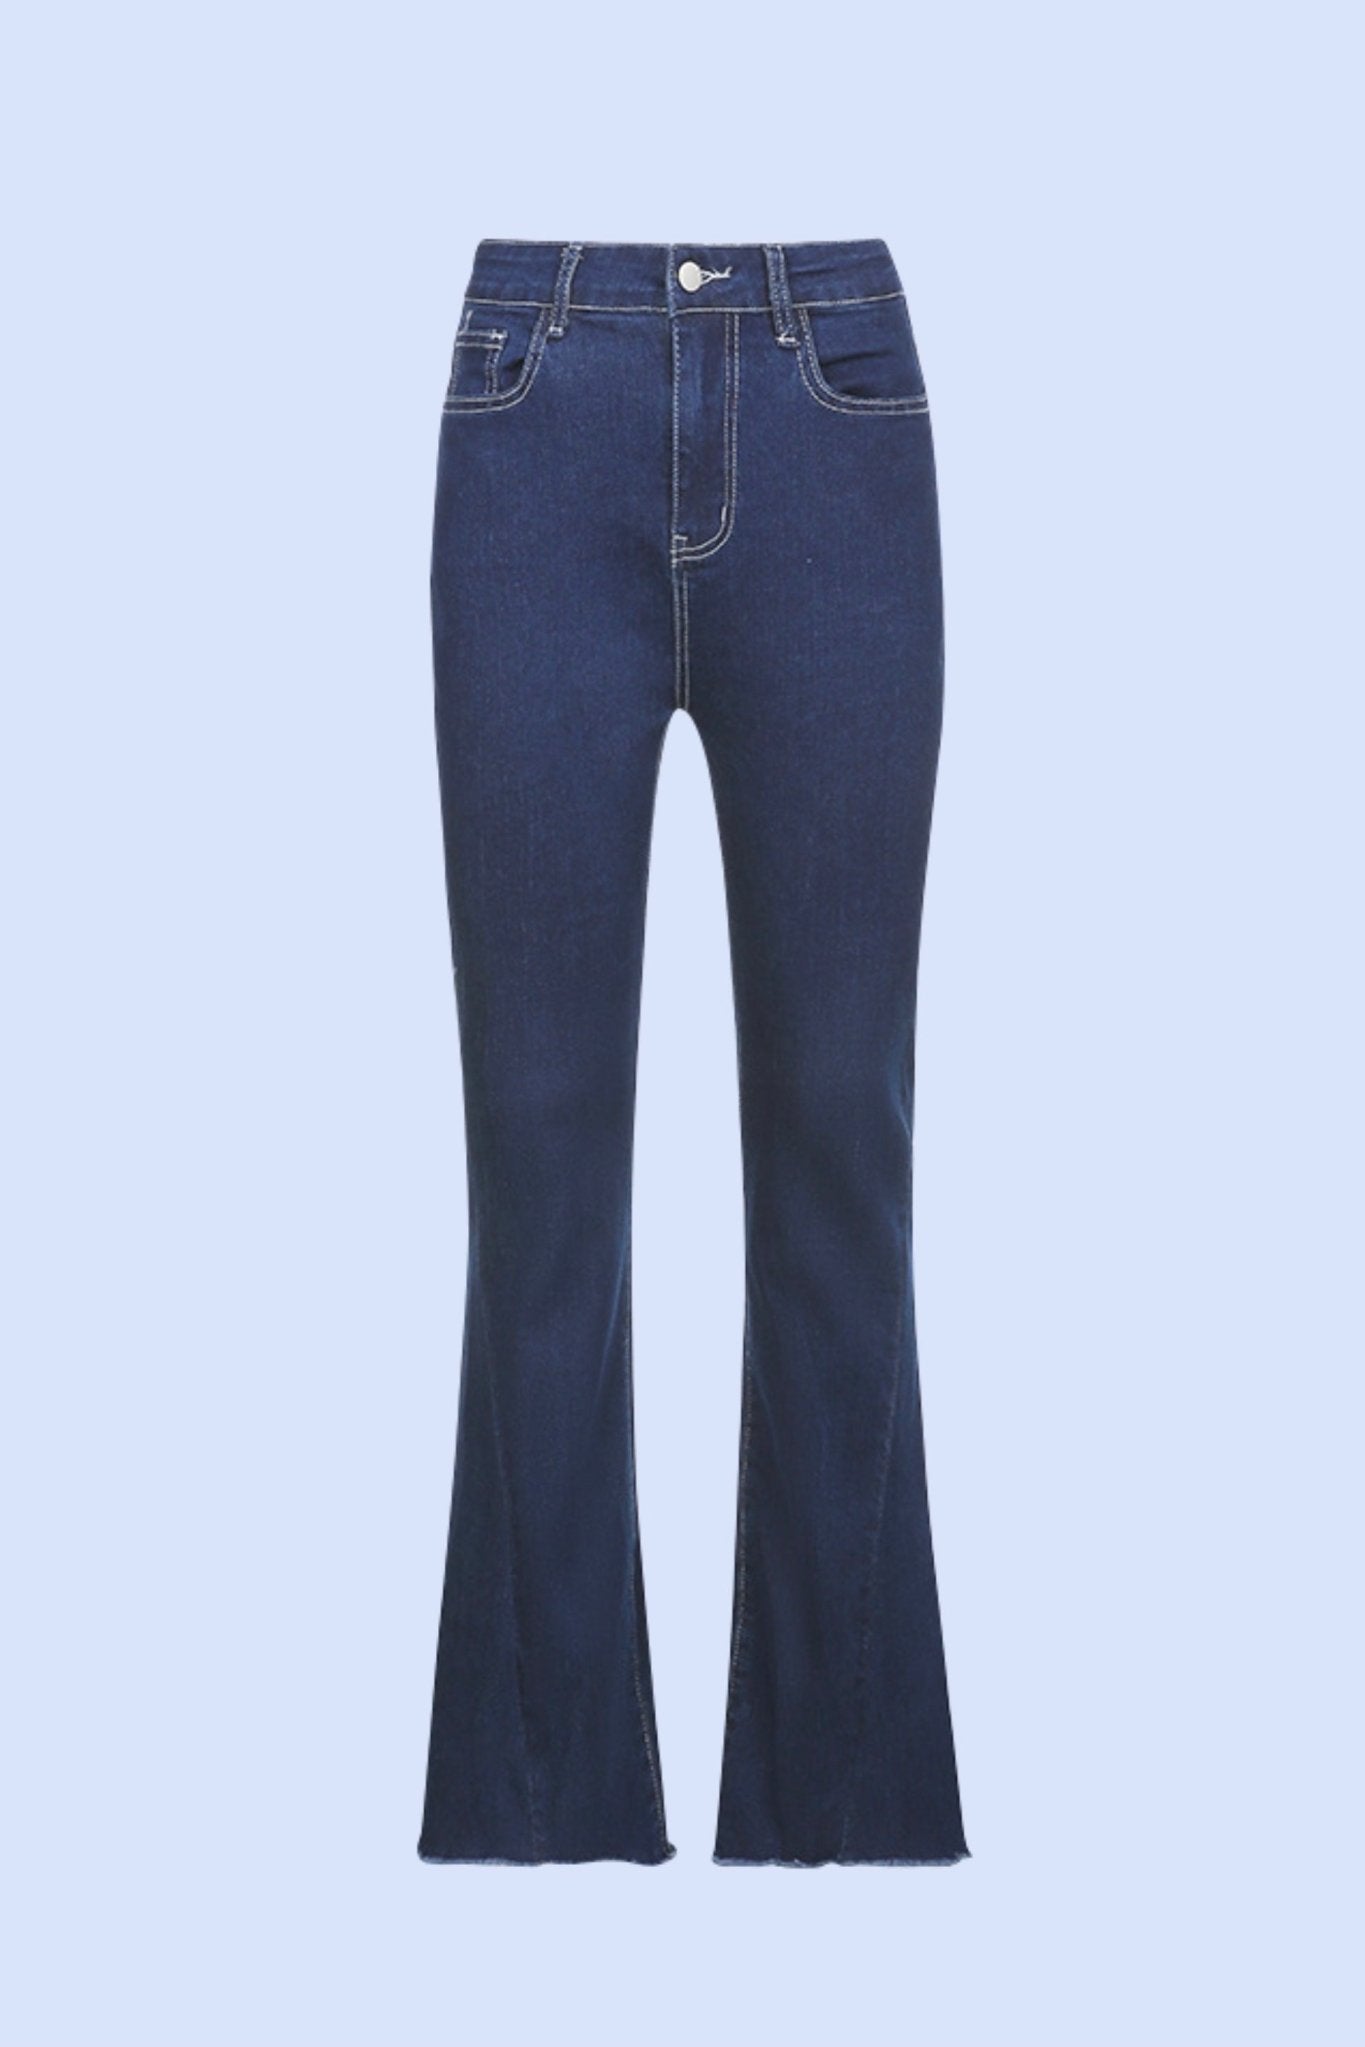 Y2K flare jeans - SCG_COLLECTIONSBottom